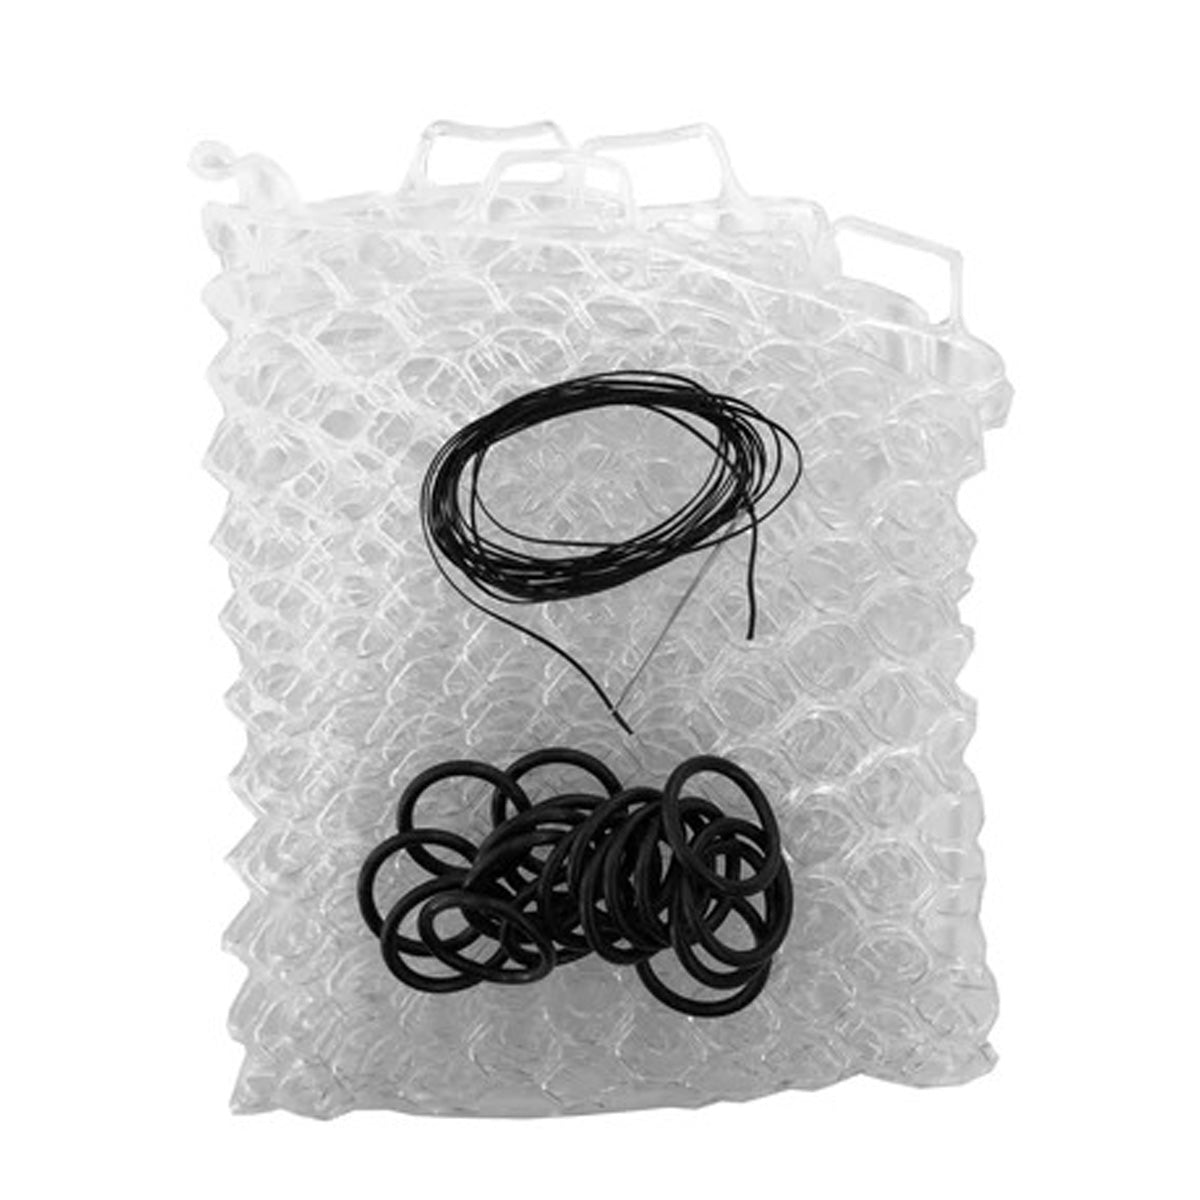 Fishpond Replacement Net Bags